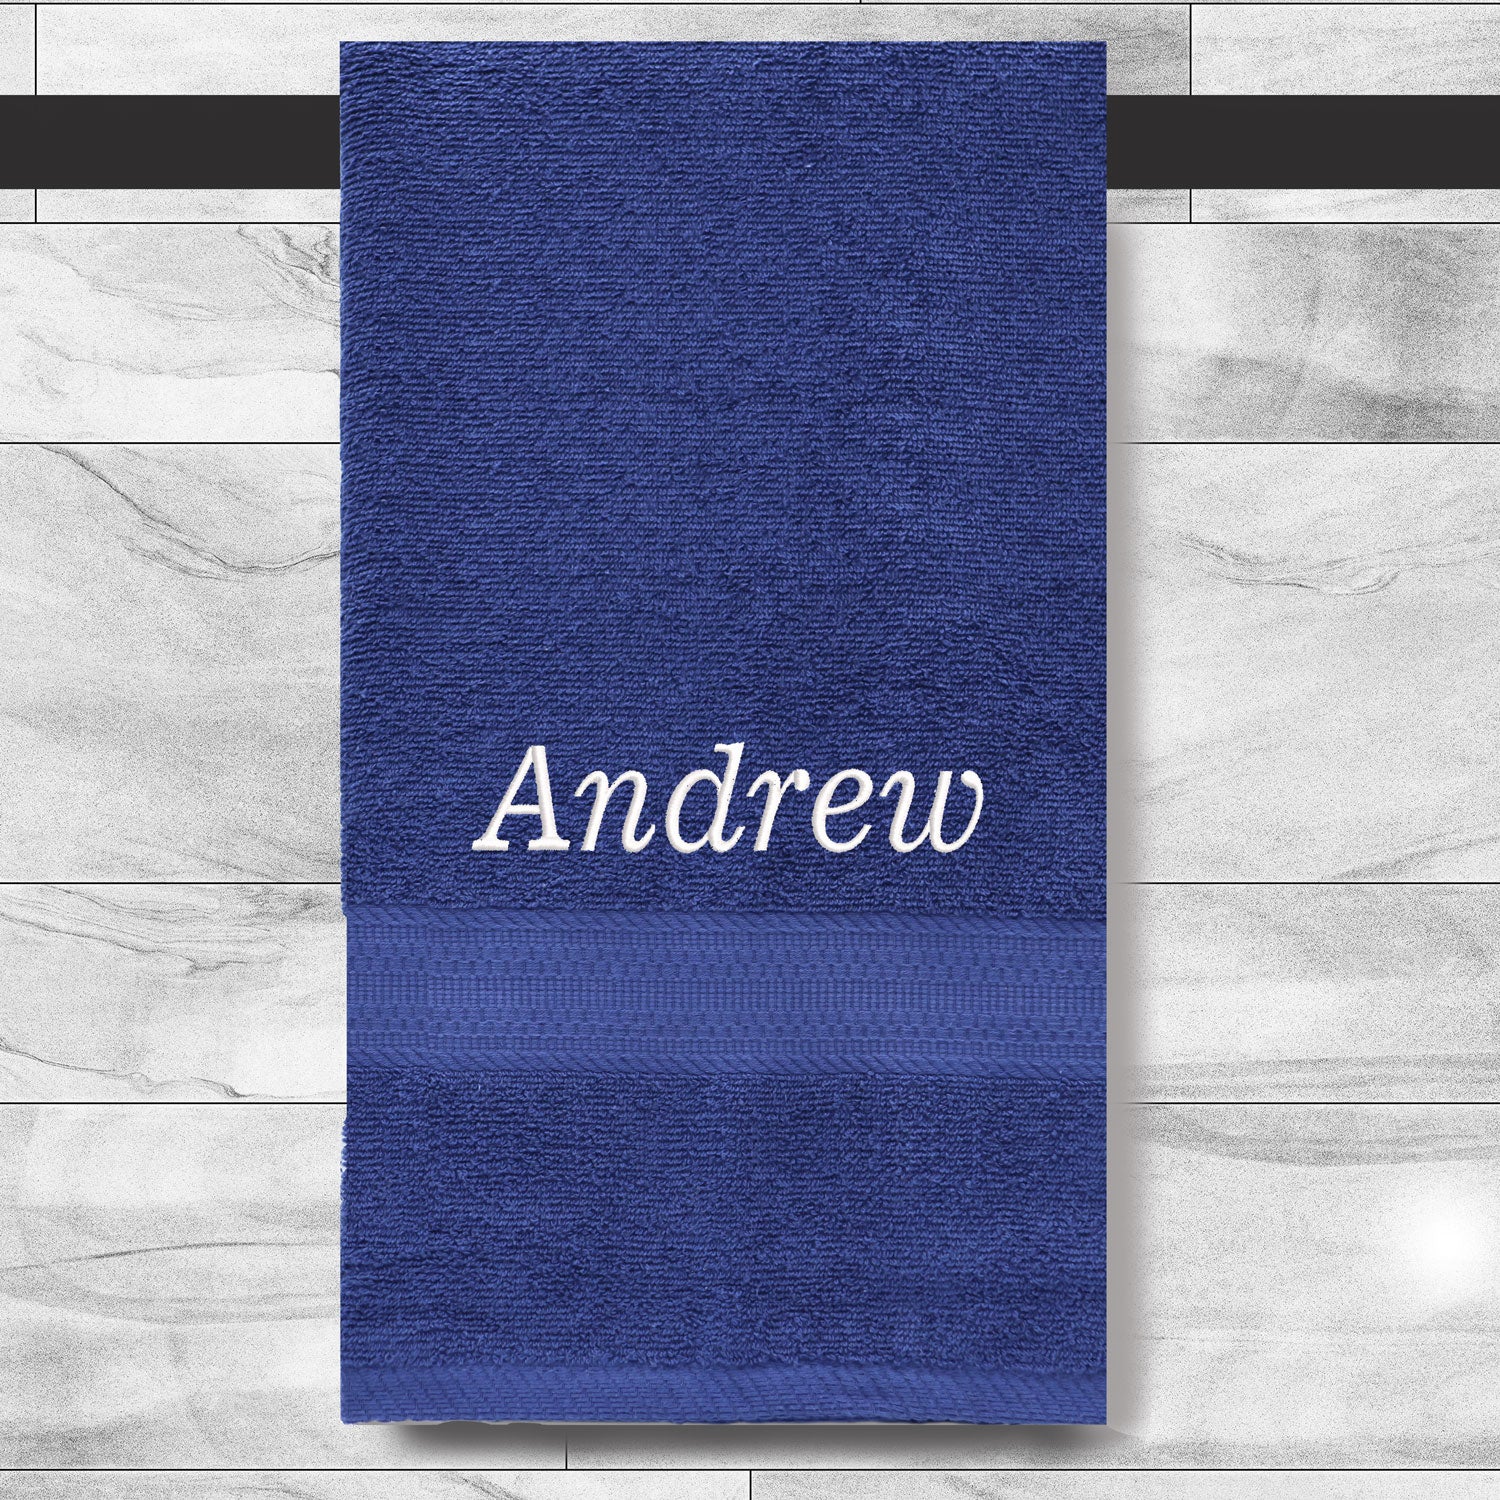 Bathroom Towel with a Custom Embroidered Name - 100% Cotton - Soft and Absorbent